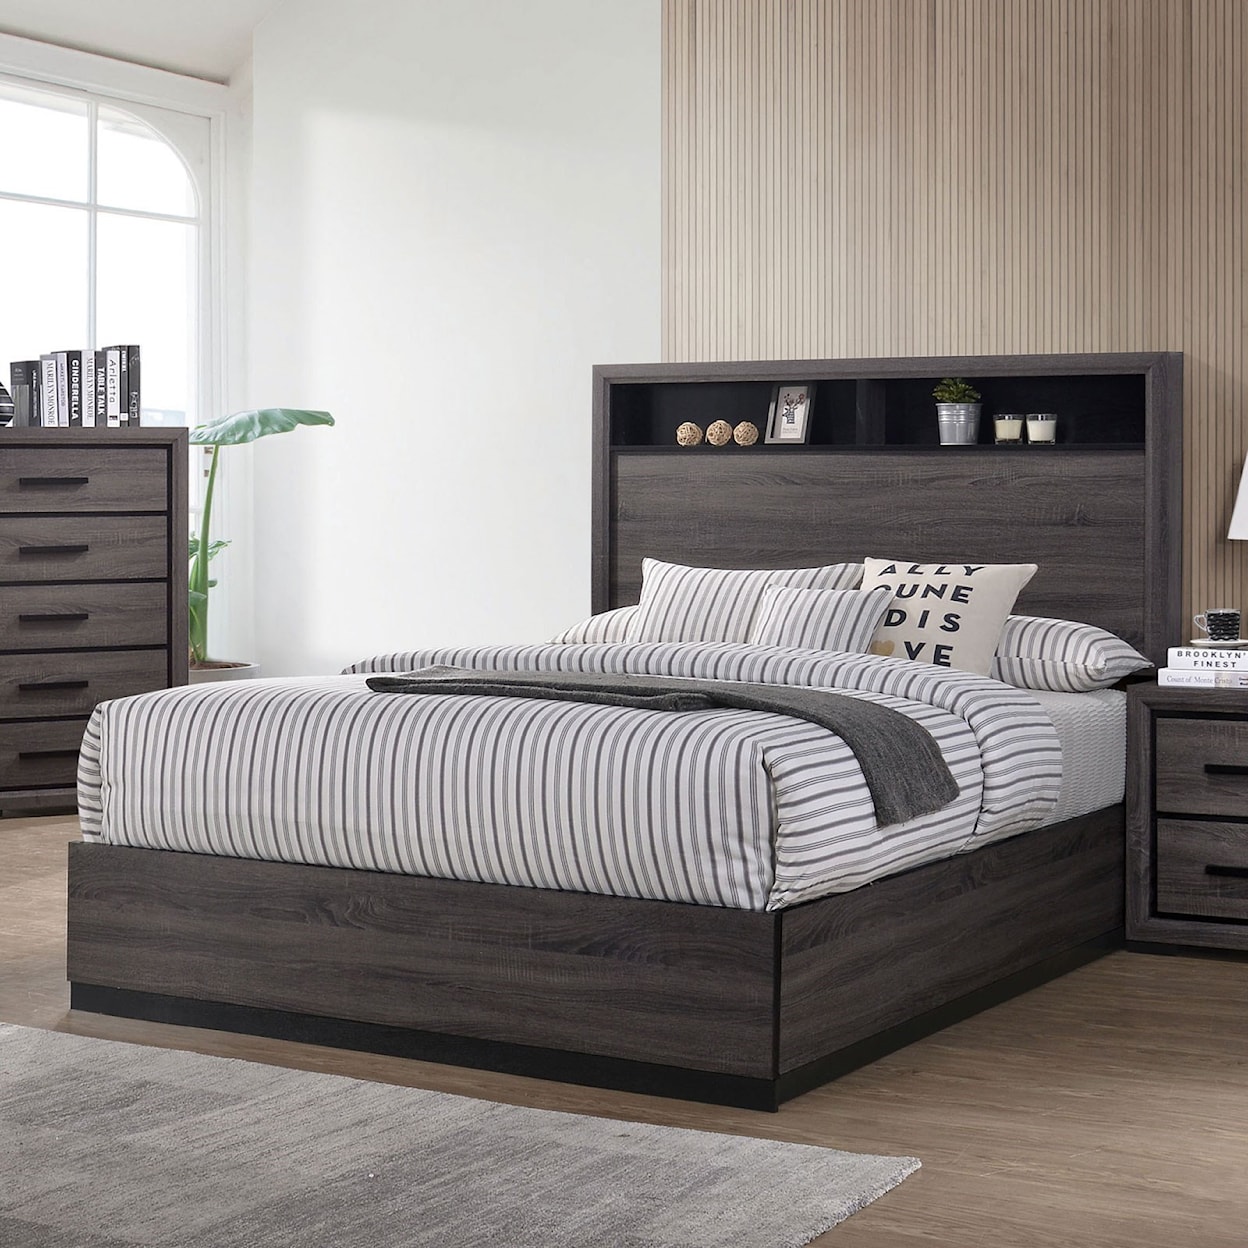 Furniture of America Conwy King Bed